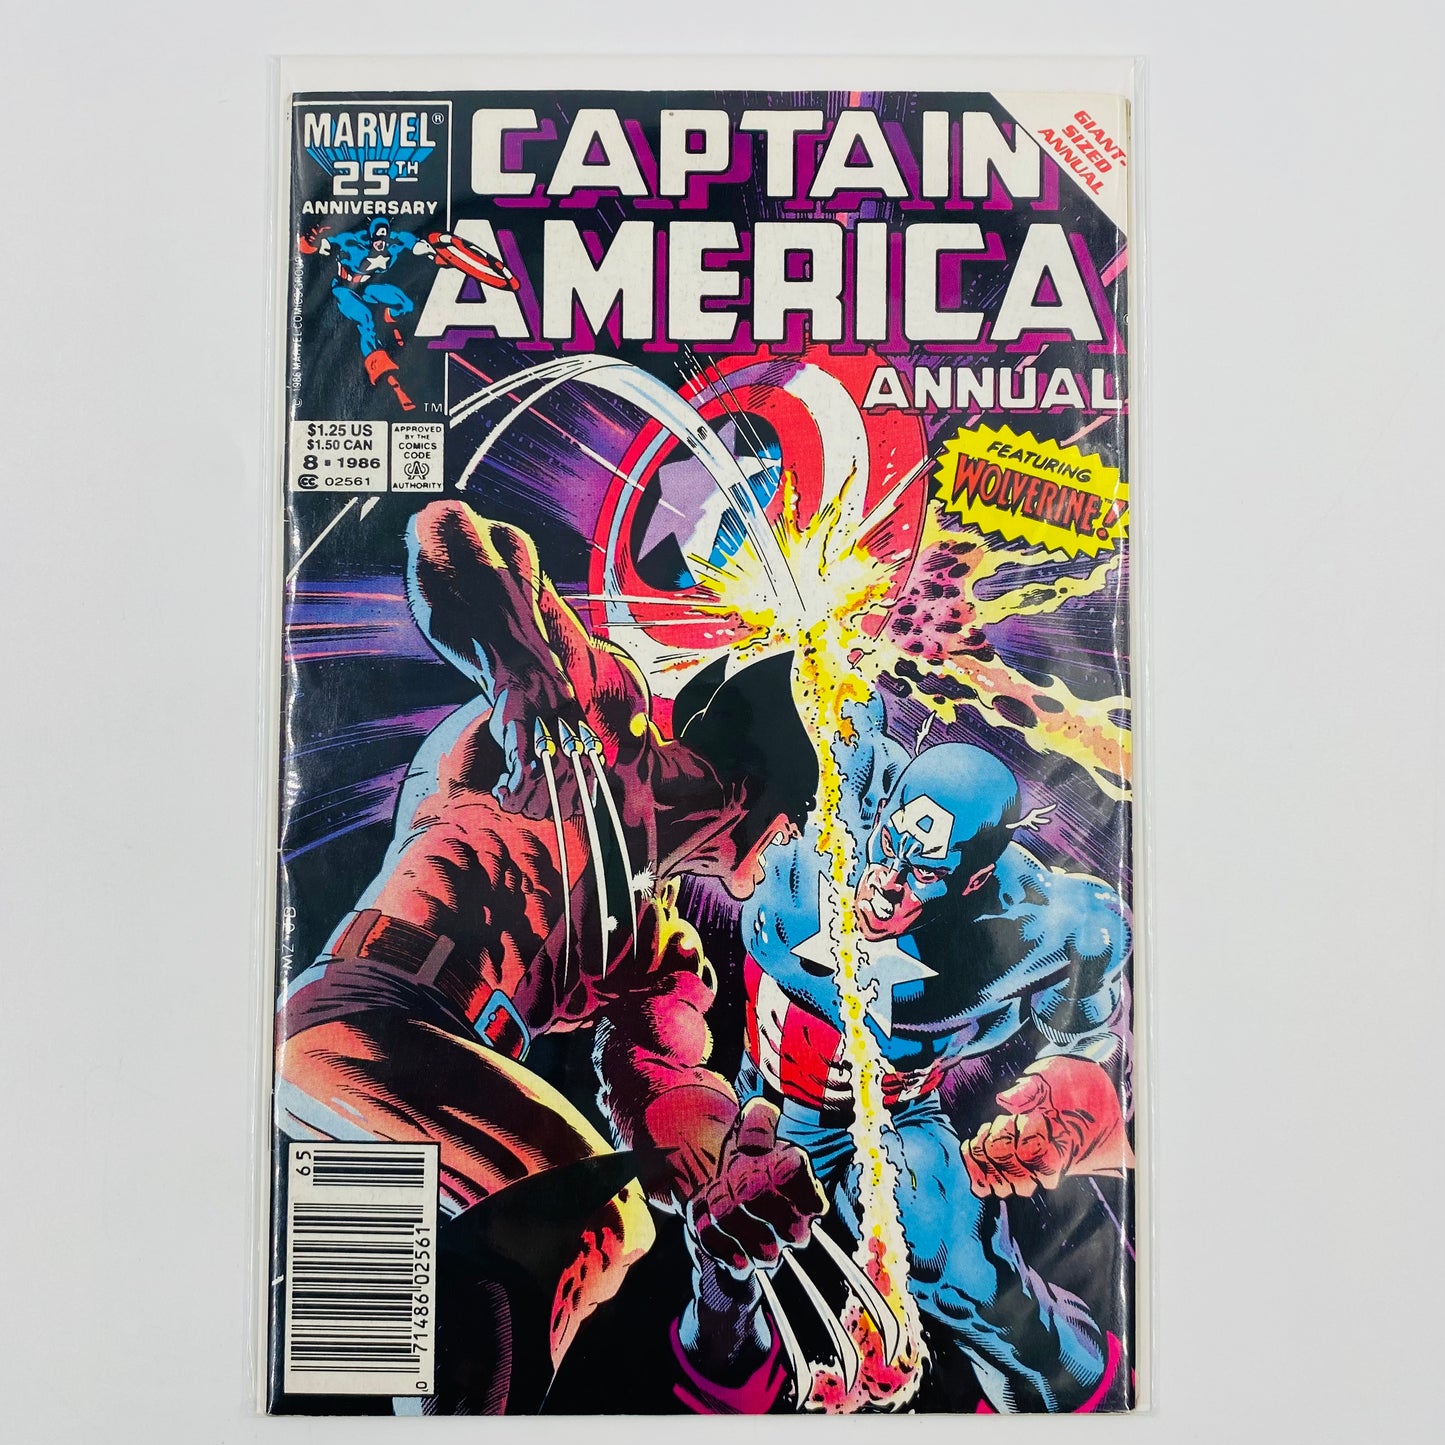 Captain America Annual #8 Guest-Starring Wolverine (1986) Marvel